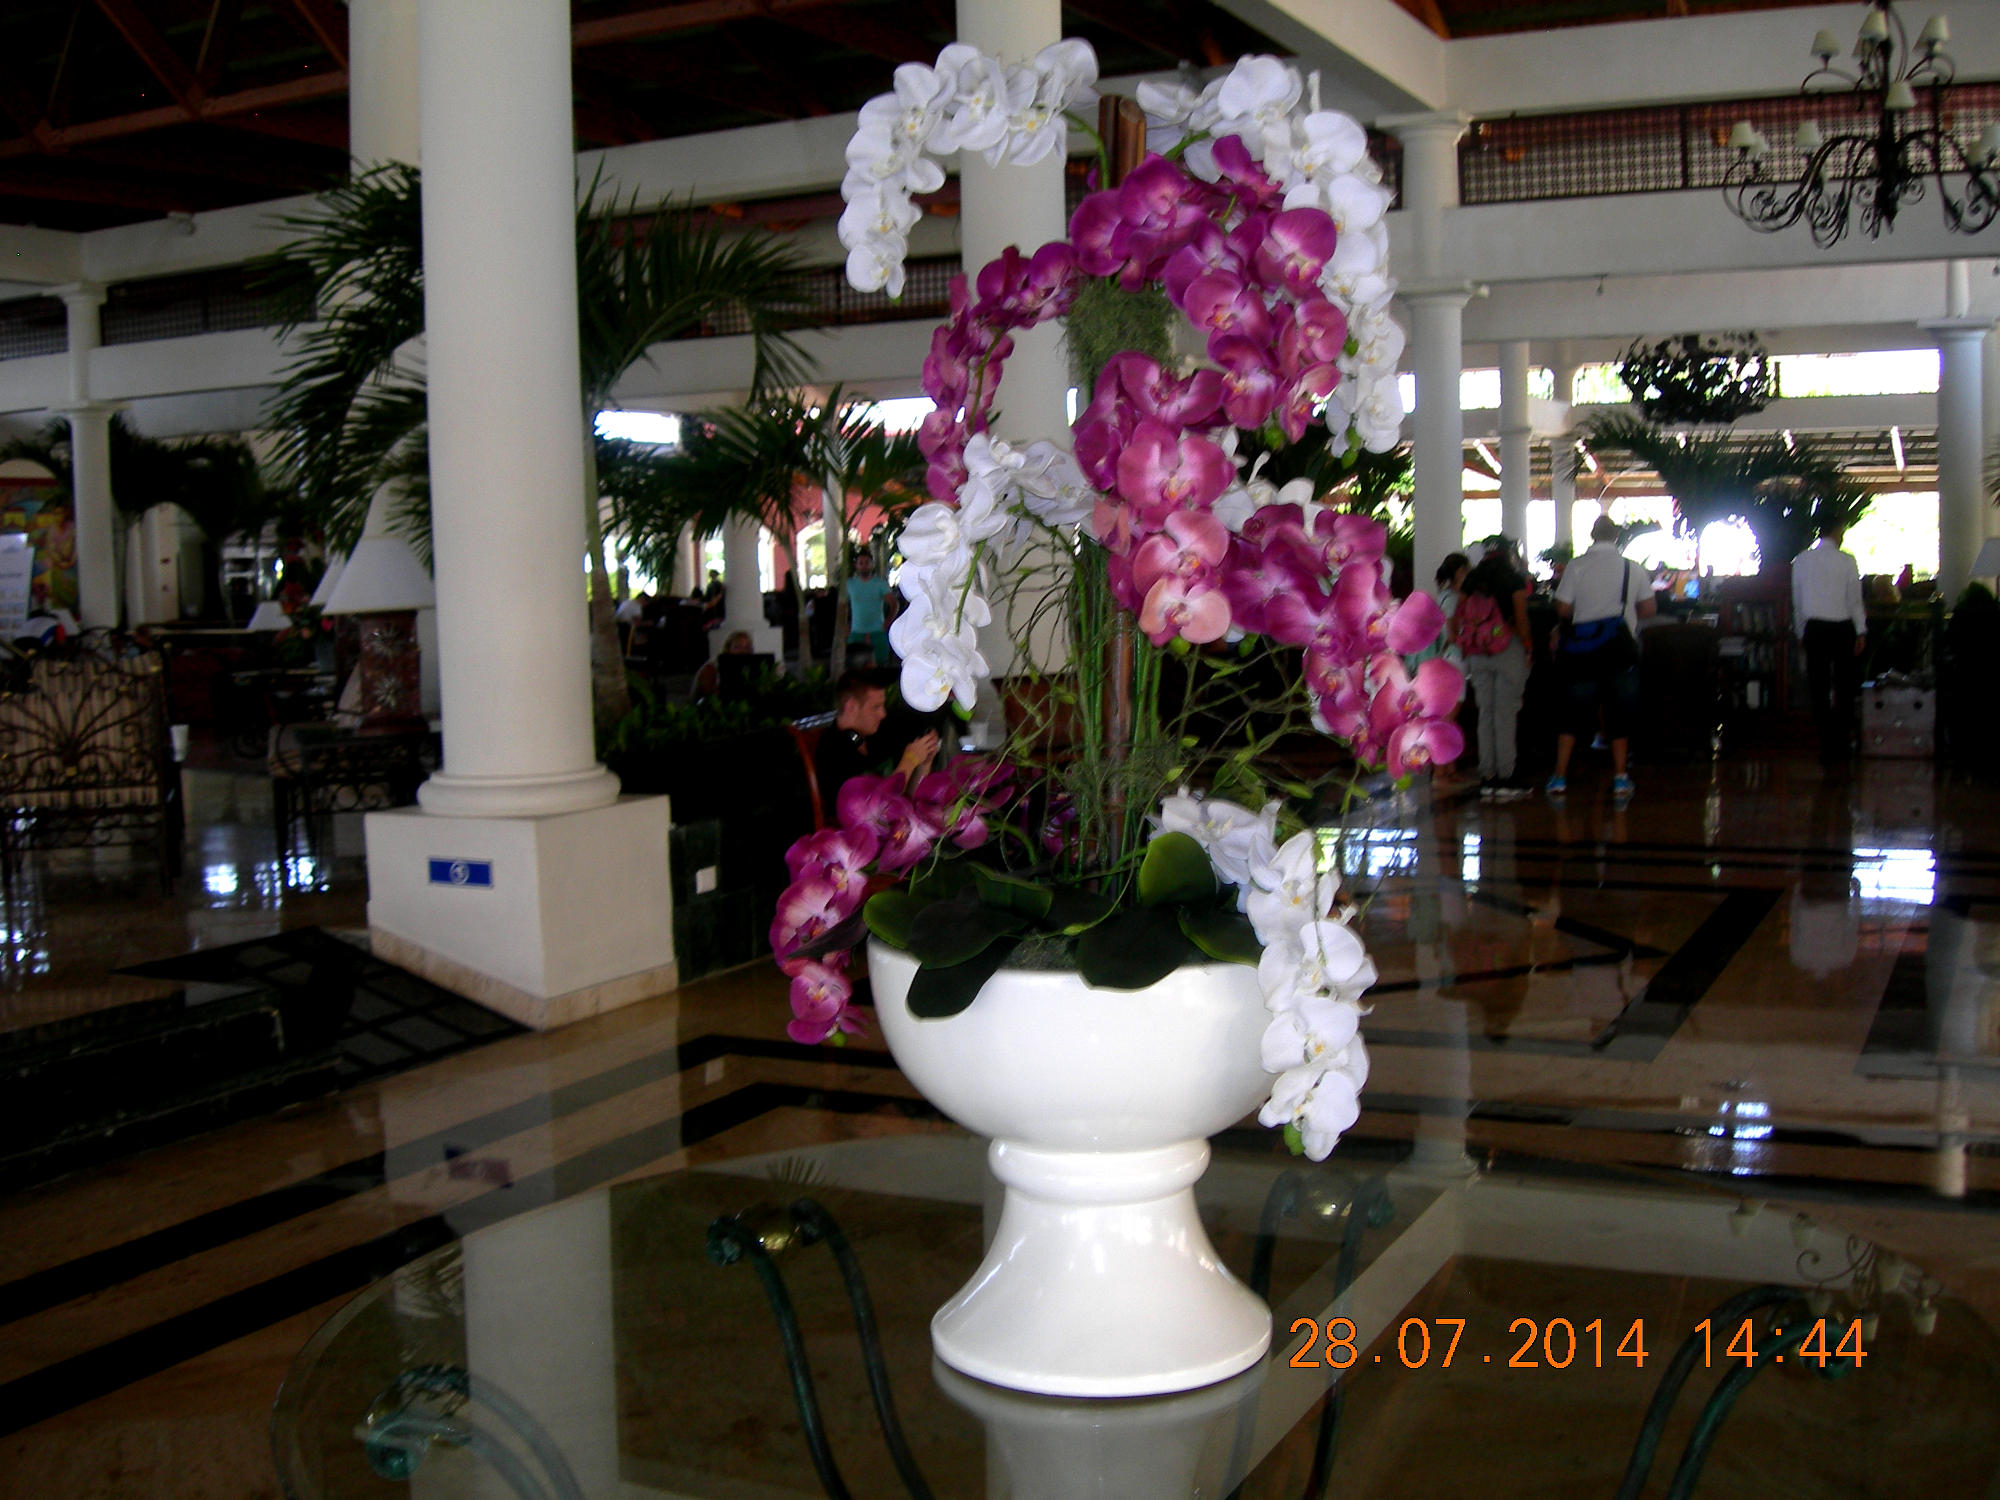 Lovely orchid arrangement in the Dominican Republic